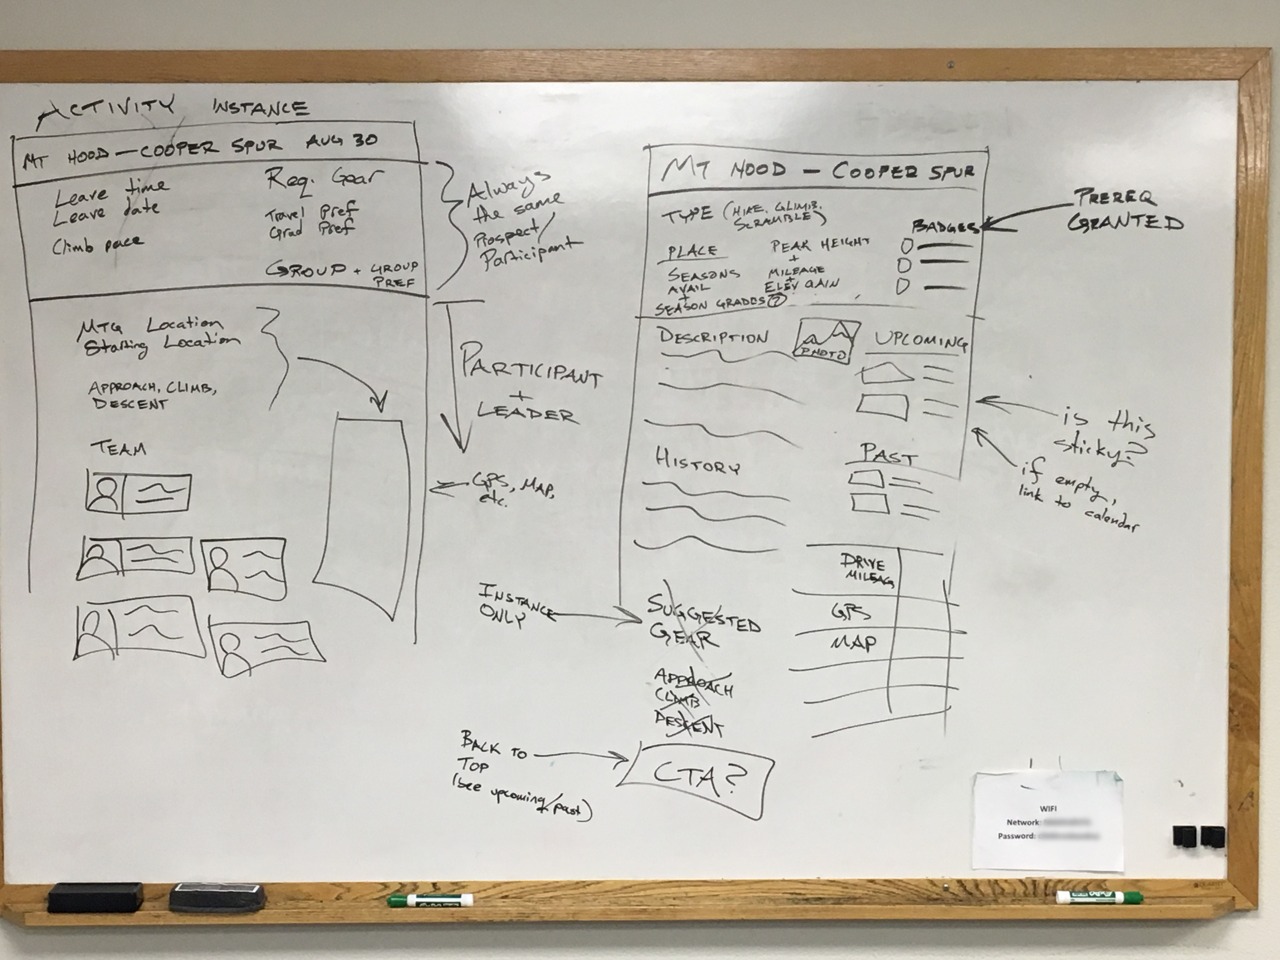 Photo: A whiteboard sketch of the activity design, made in collaboration with Mazamas